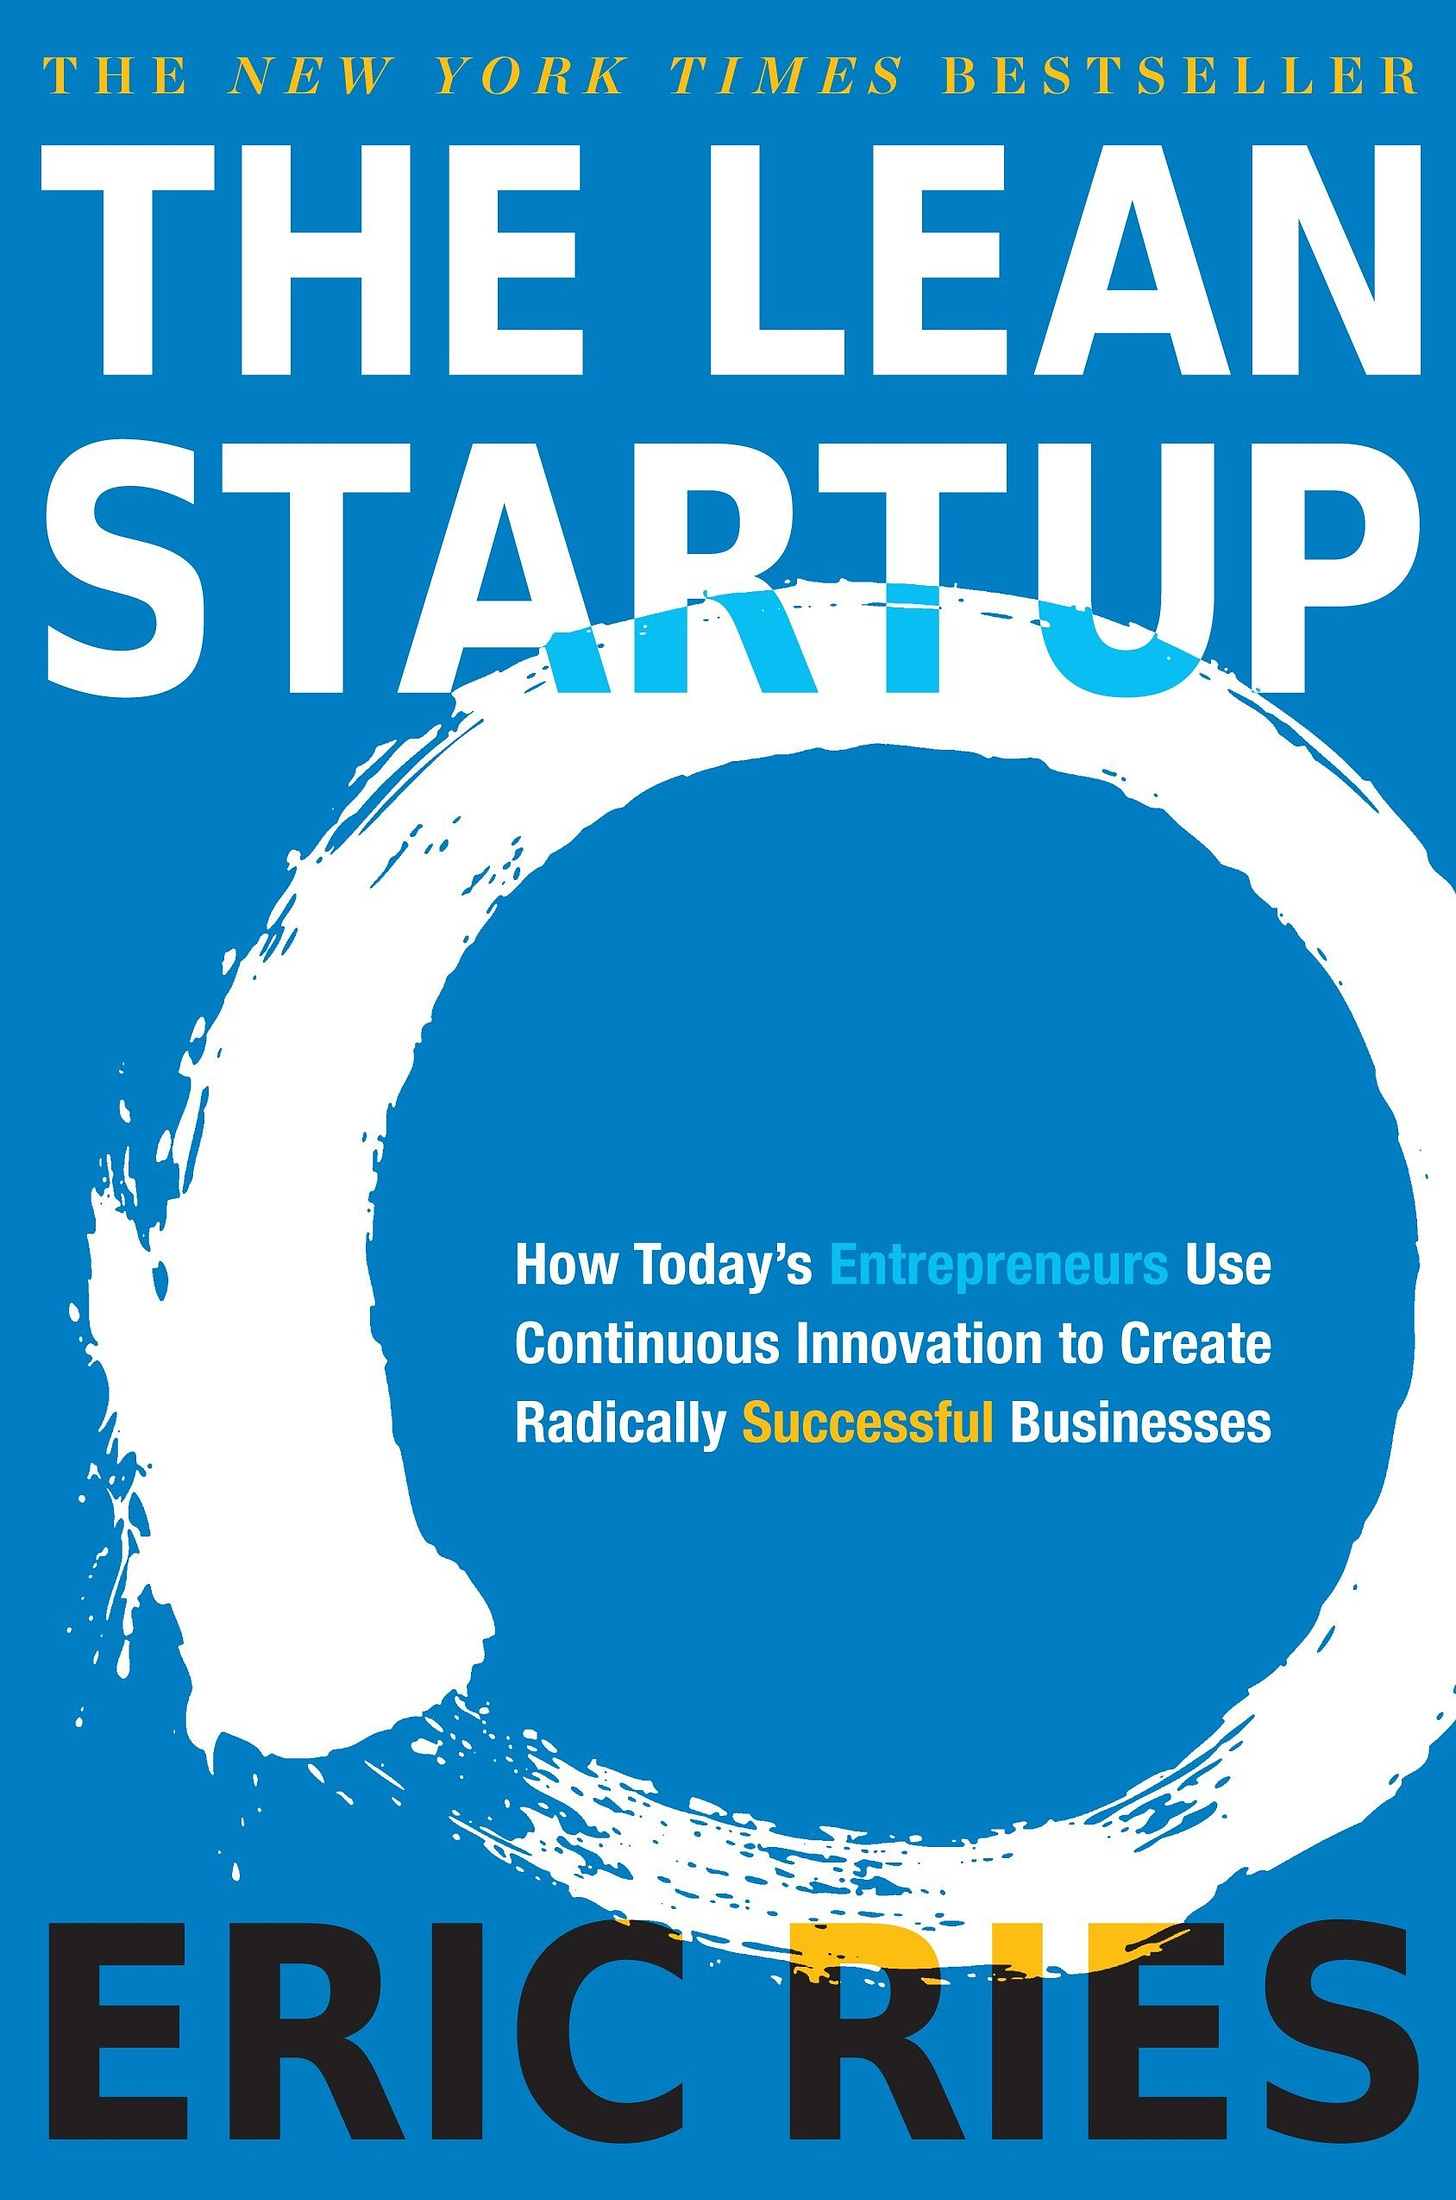 Amazon.com: The Lean Startup: How Today's Entrepreneurs Use Continuous  Innovation to Create Radically Successful Businesses (9780307887894): Ries,  Eric: Books